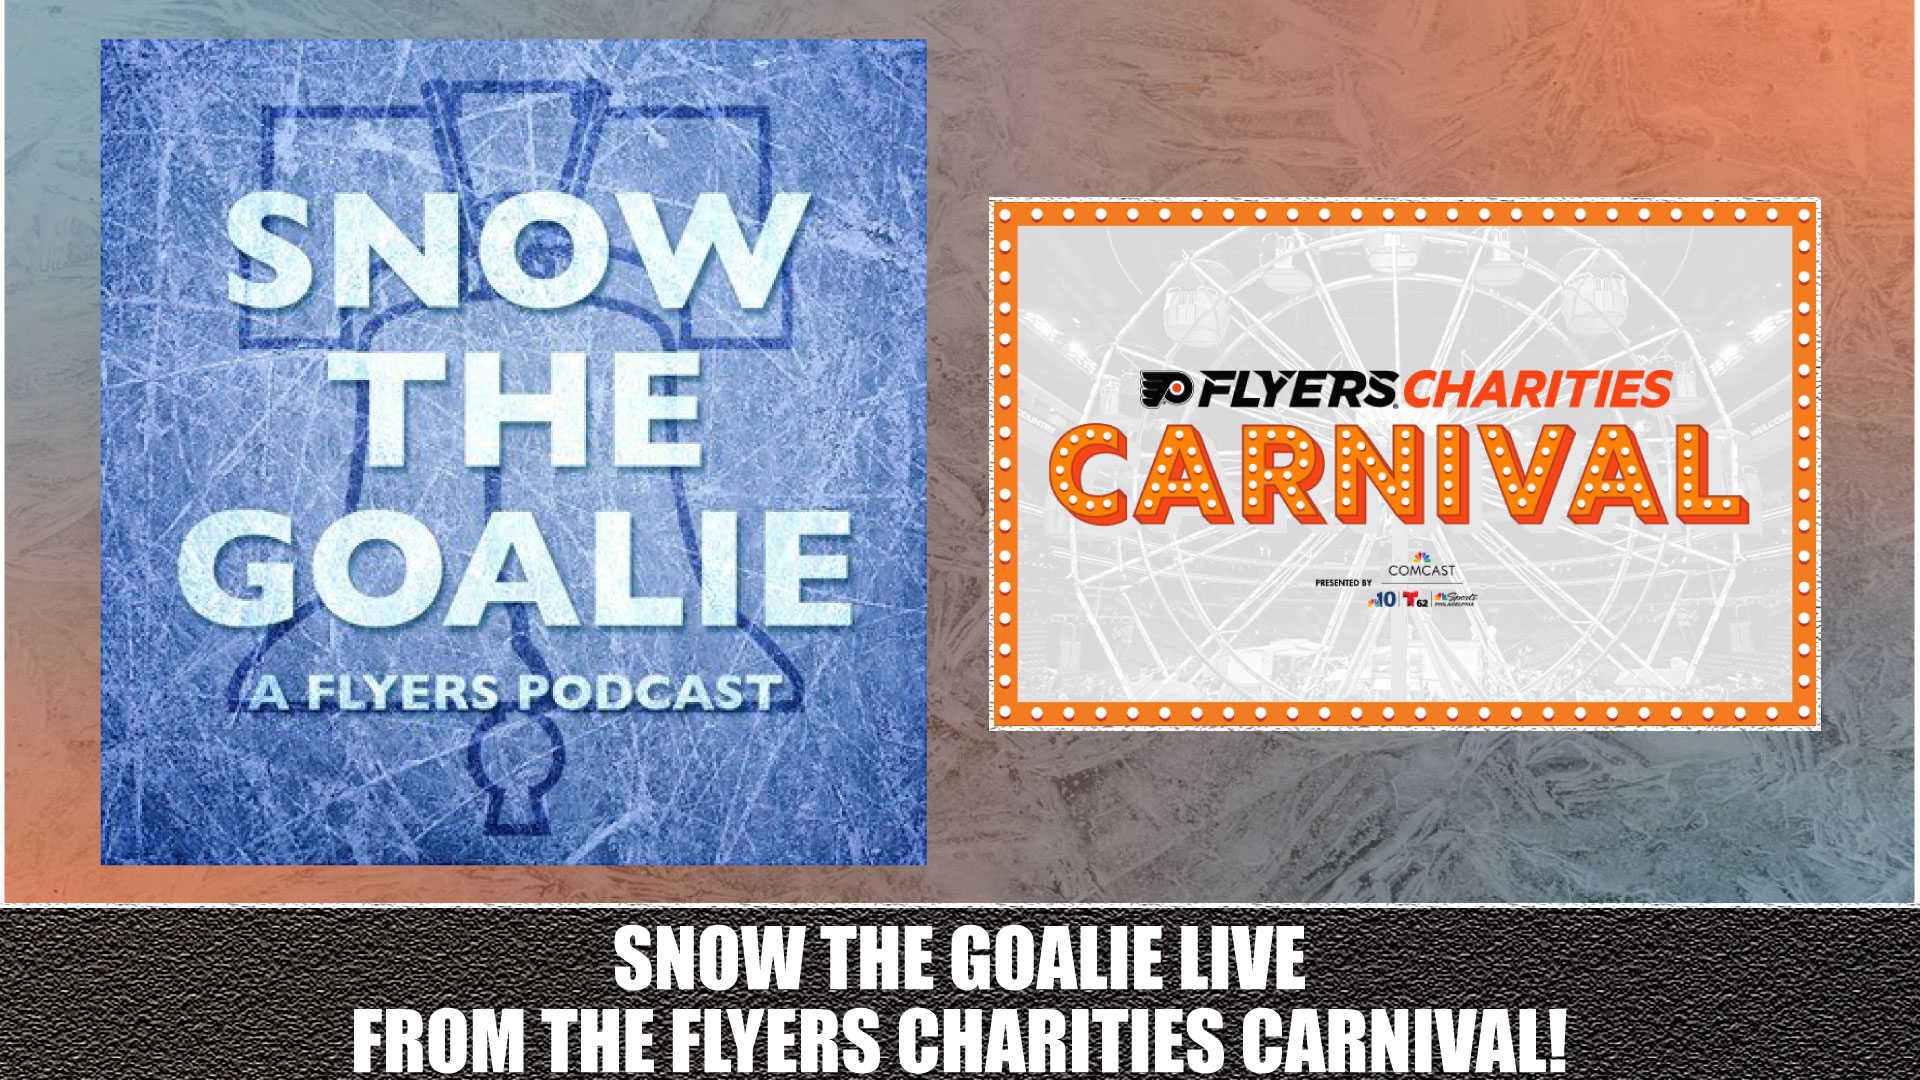 Snow The Goalie LIVE from the Flyers Charities Carnival